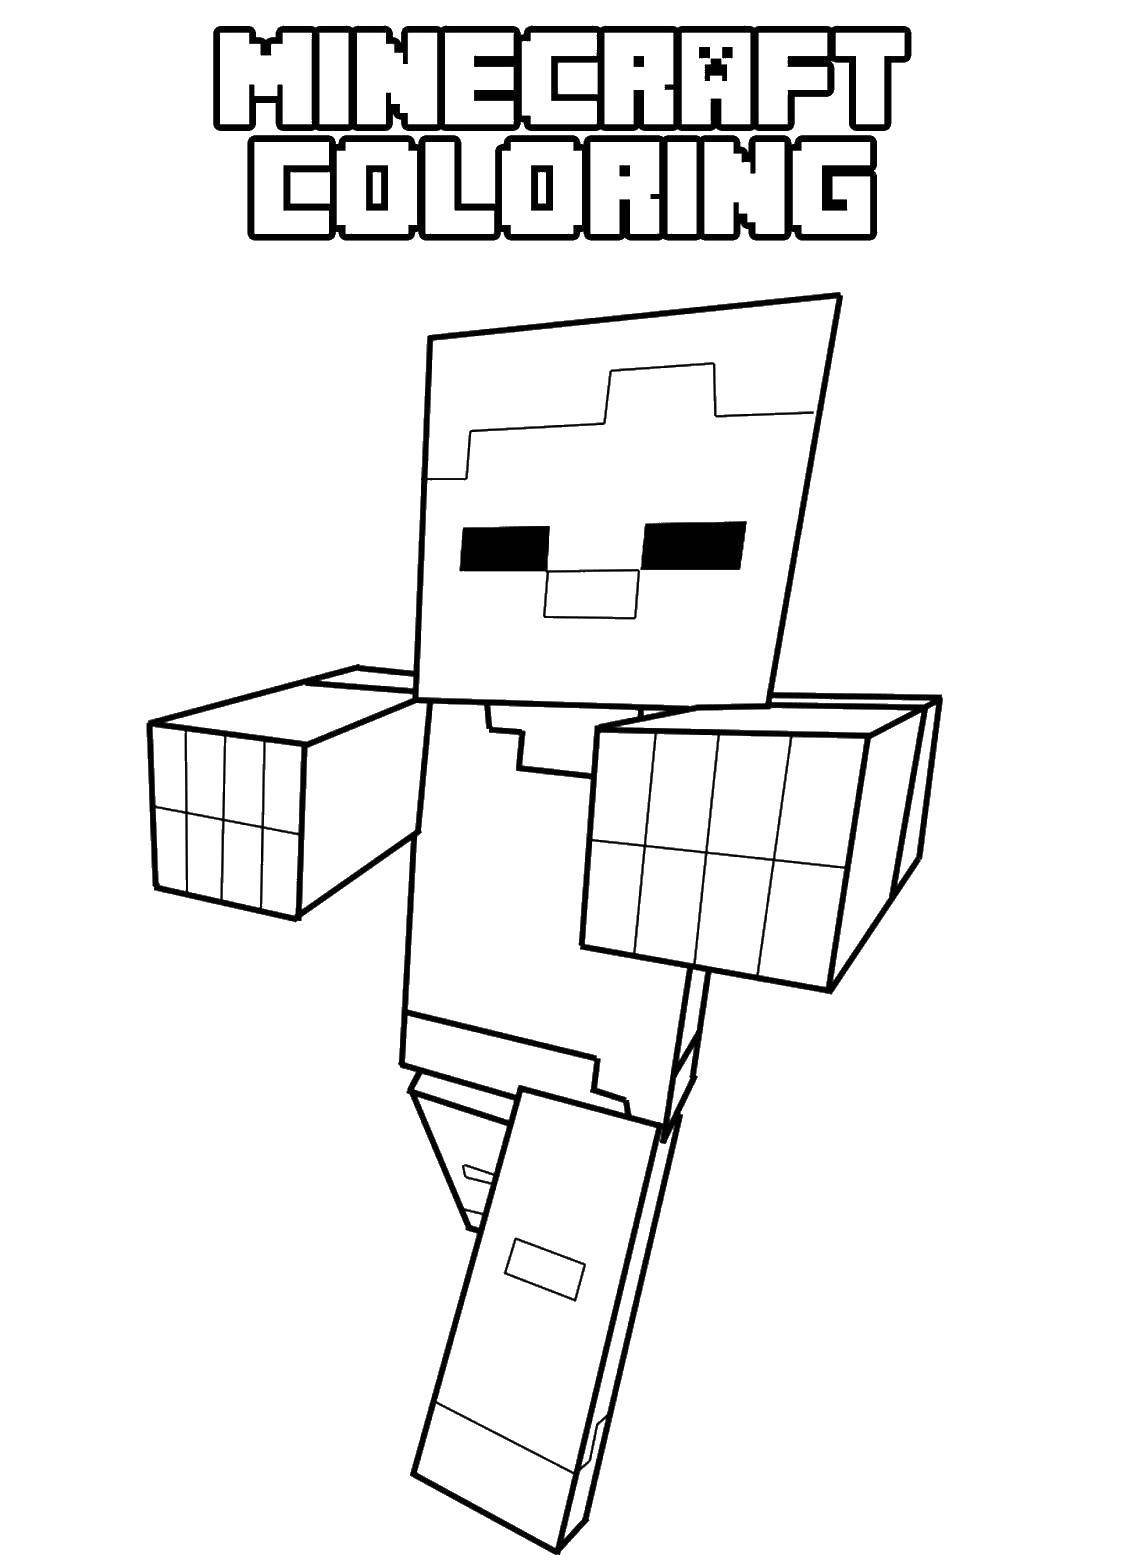 Coloring Minecraft man. Category minecraft. Tags:  minecraft, people.